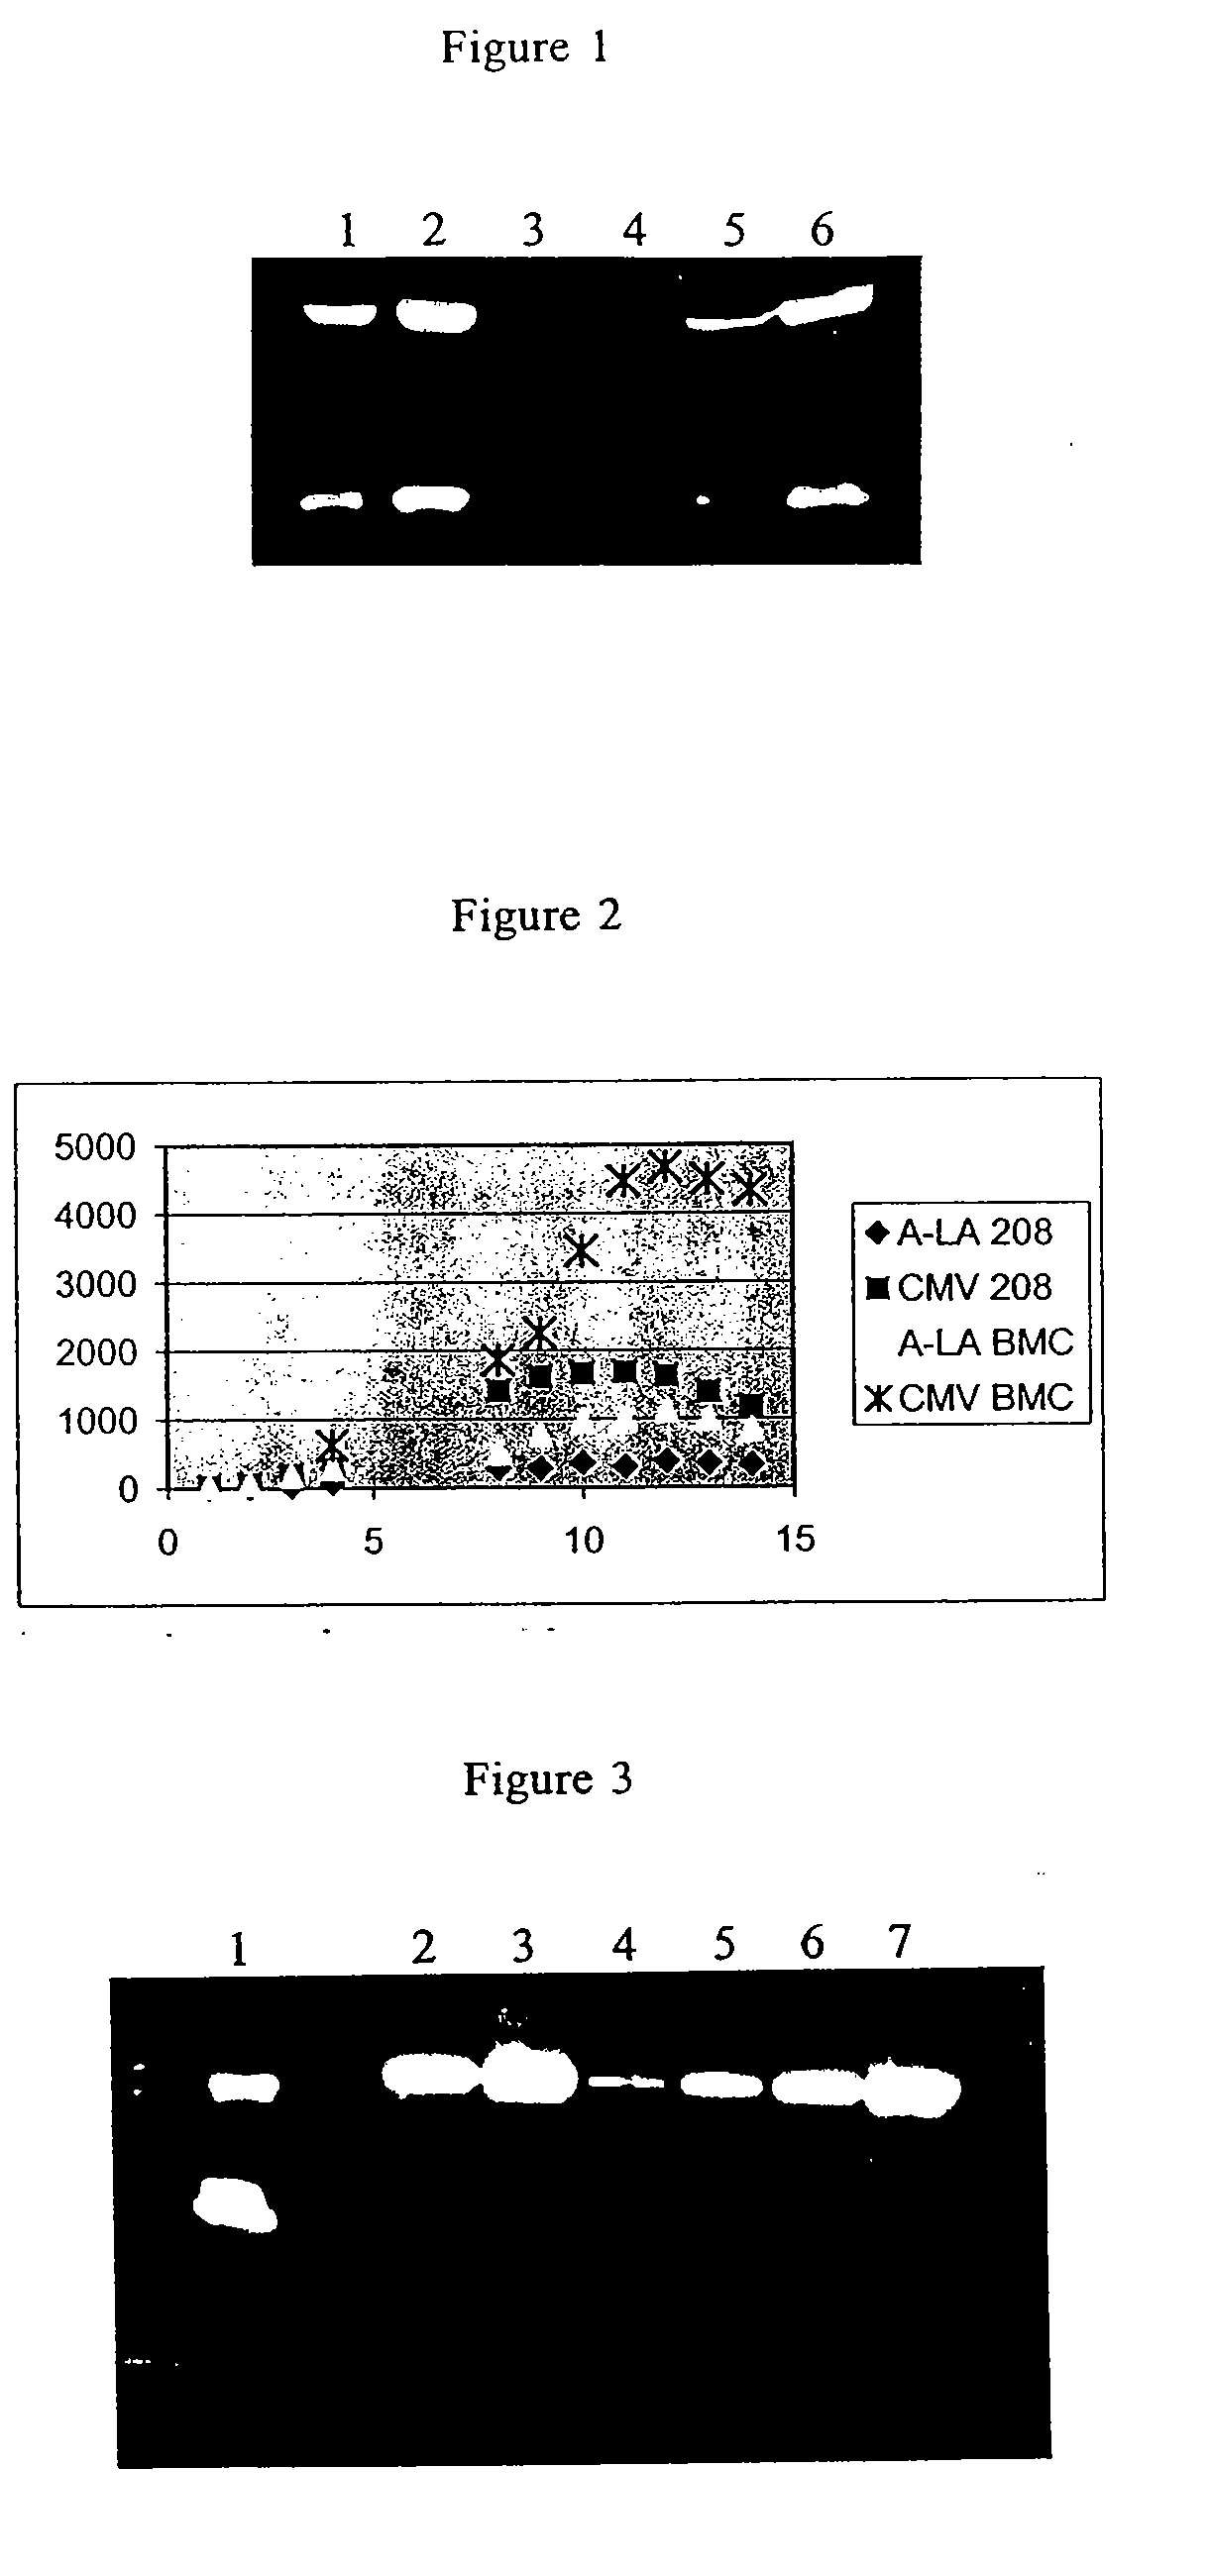 Host Cells Containing Multiple Integrating Vectors